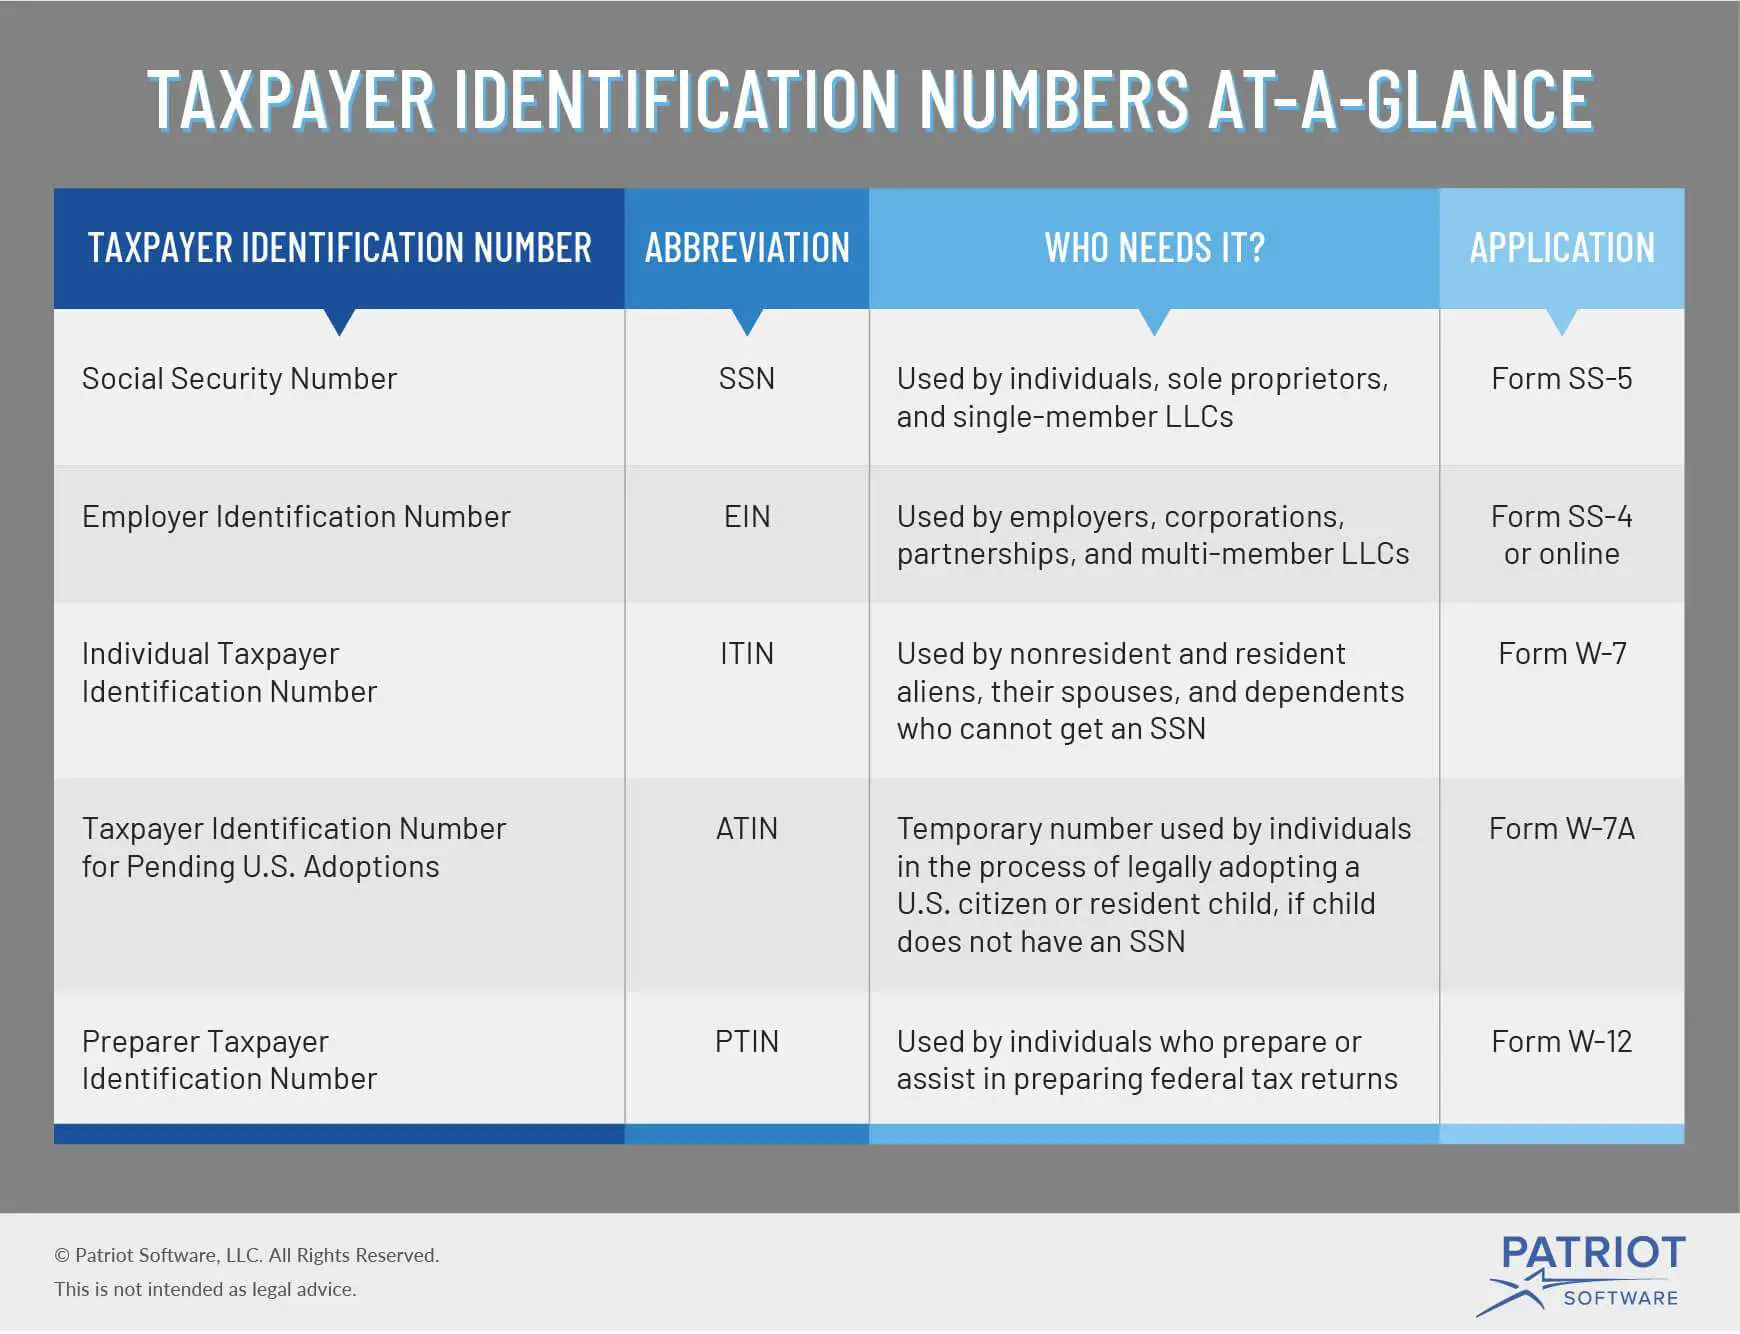 What is a Taxpayer Identification Number?